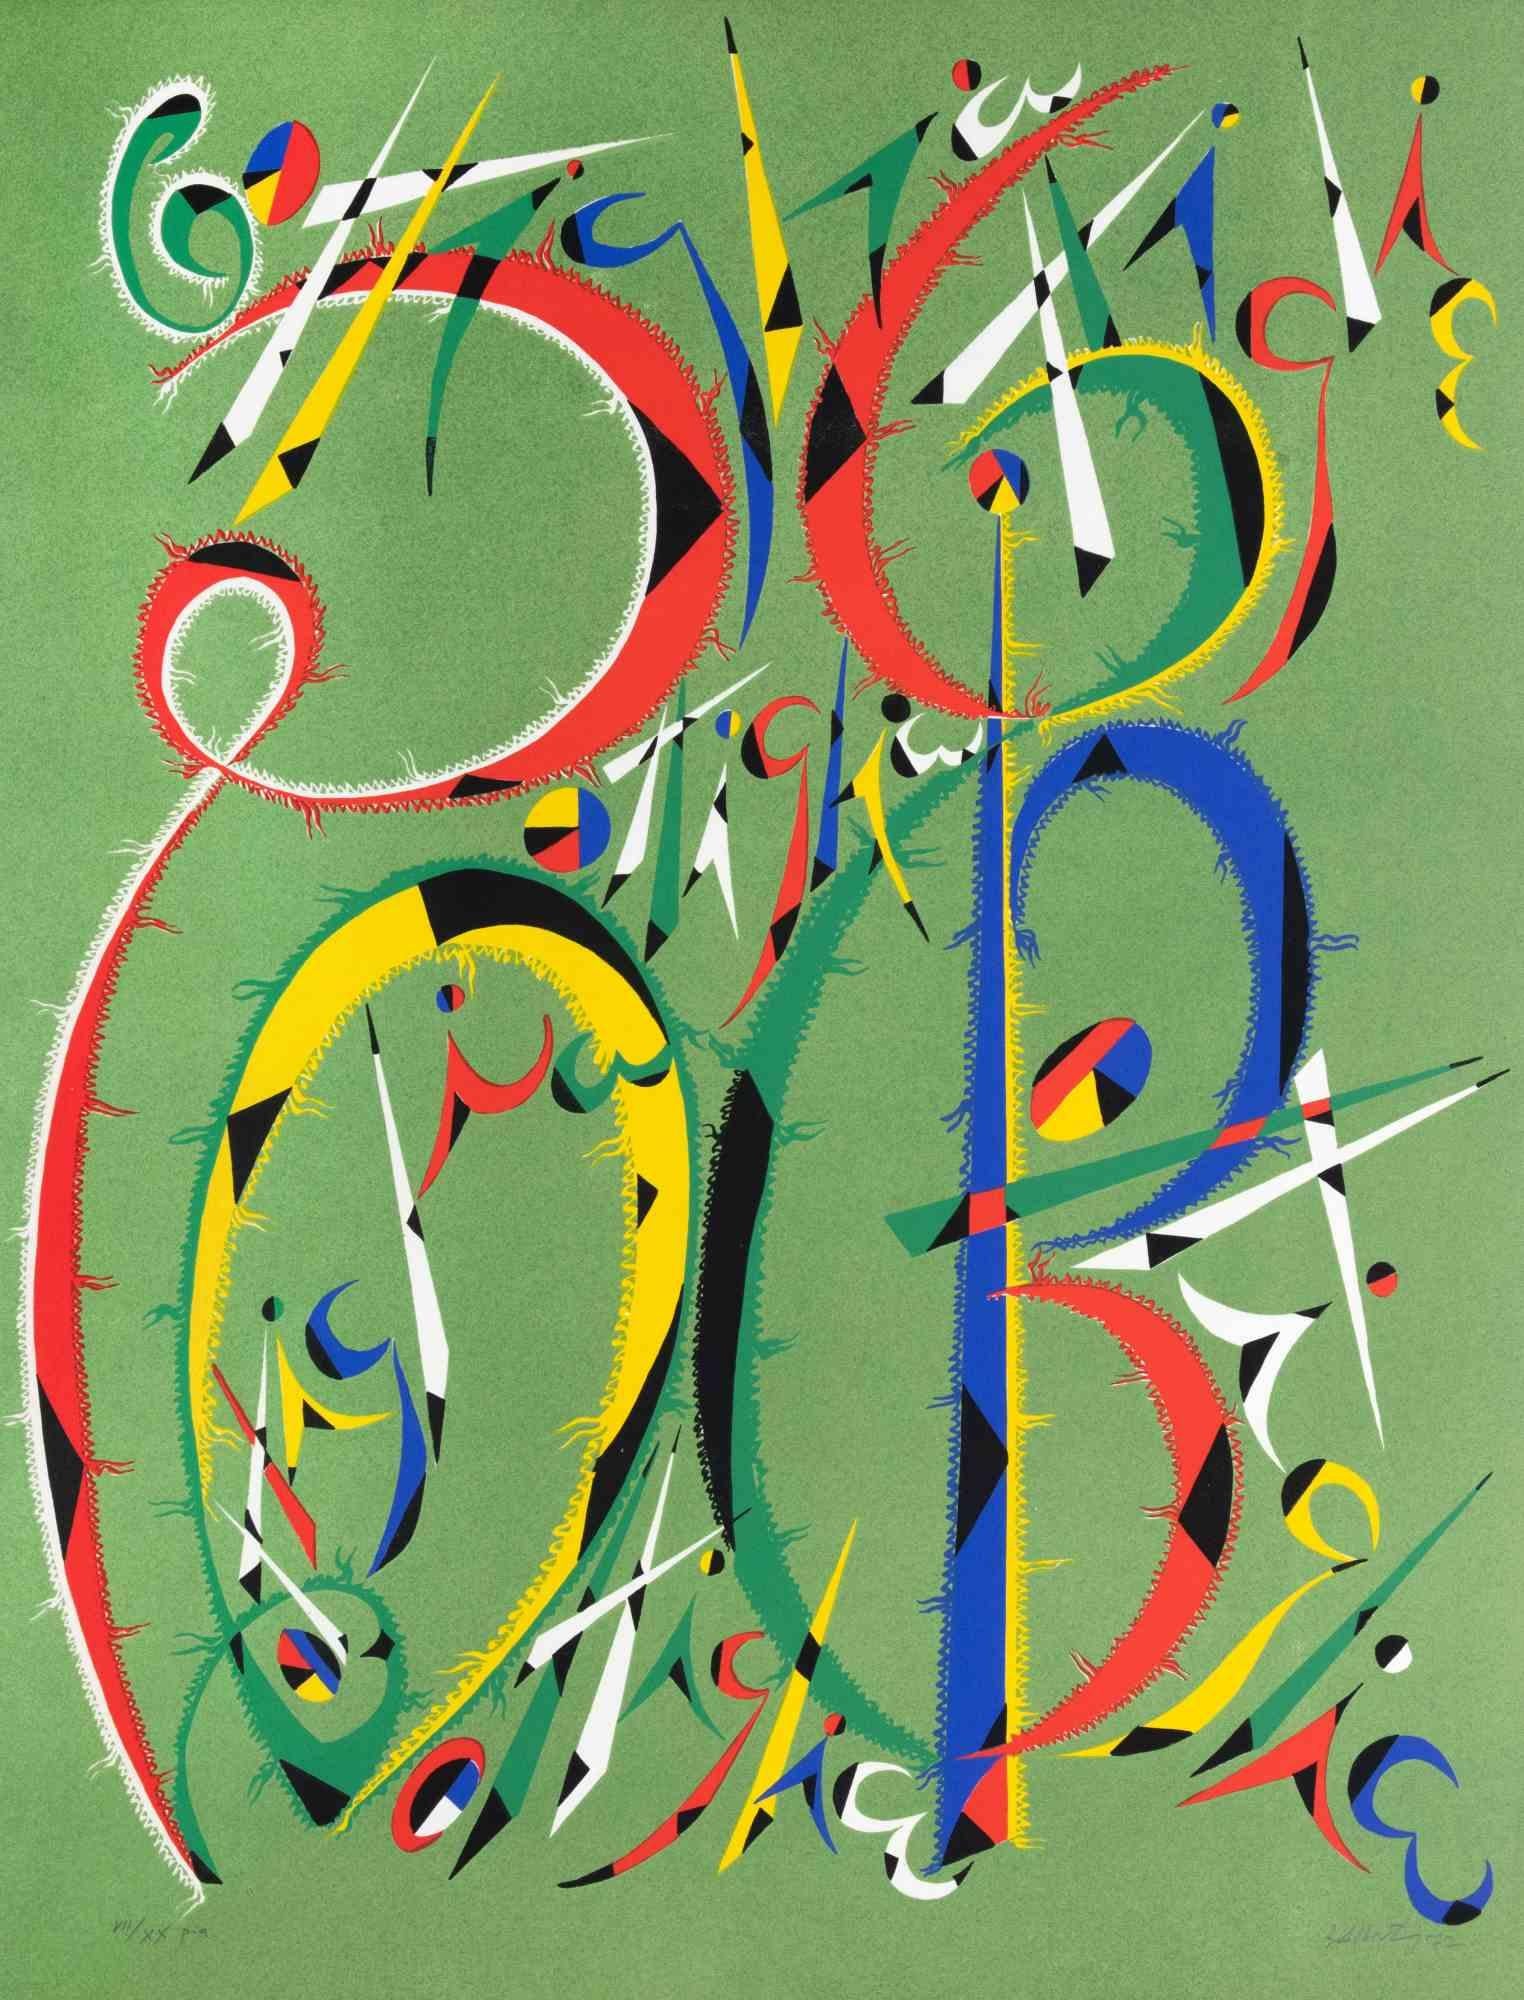 Letter B by Rafael Alberti, from Alphabet series,  is a lithograph, realized by Rafael Alberti in 1972.

Hand signed and dated on the lower right margin. Numbered on the lower left.

Editioon of VII/XX

The artwork represents the letter B, with a